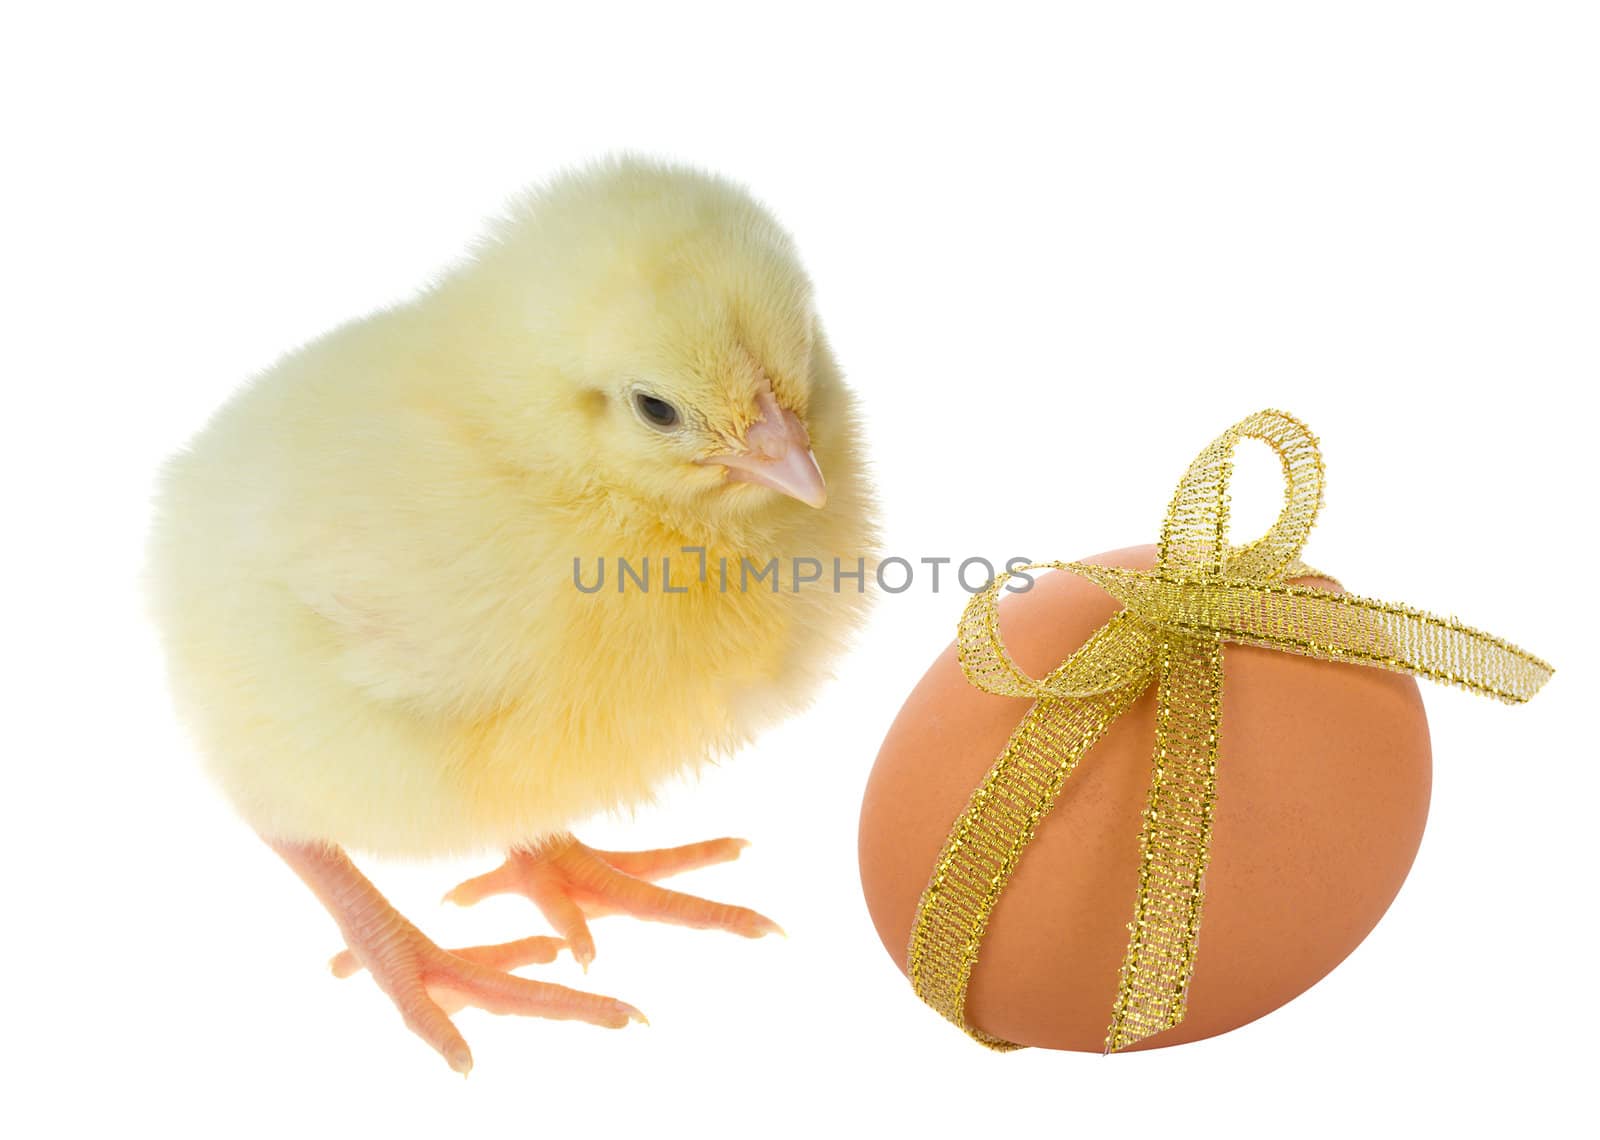 small chick and decorated egg by Alekcey